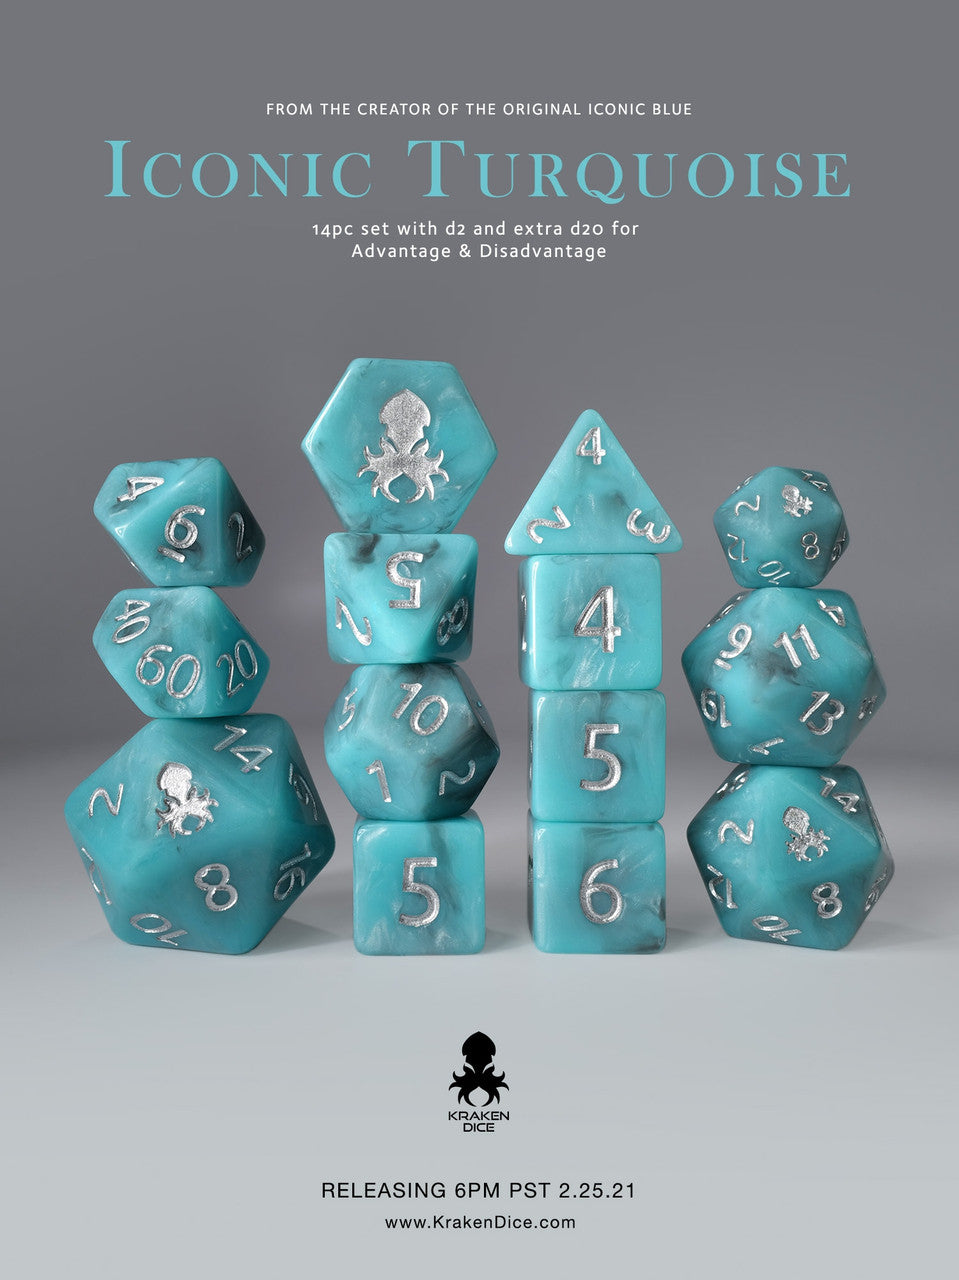 14pc Iconic Turquoise Polyhedral Dice Set with Silver Ink